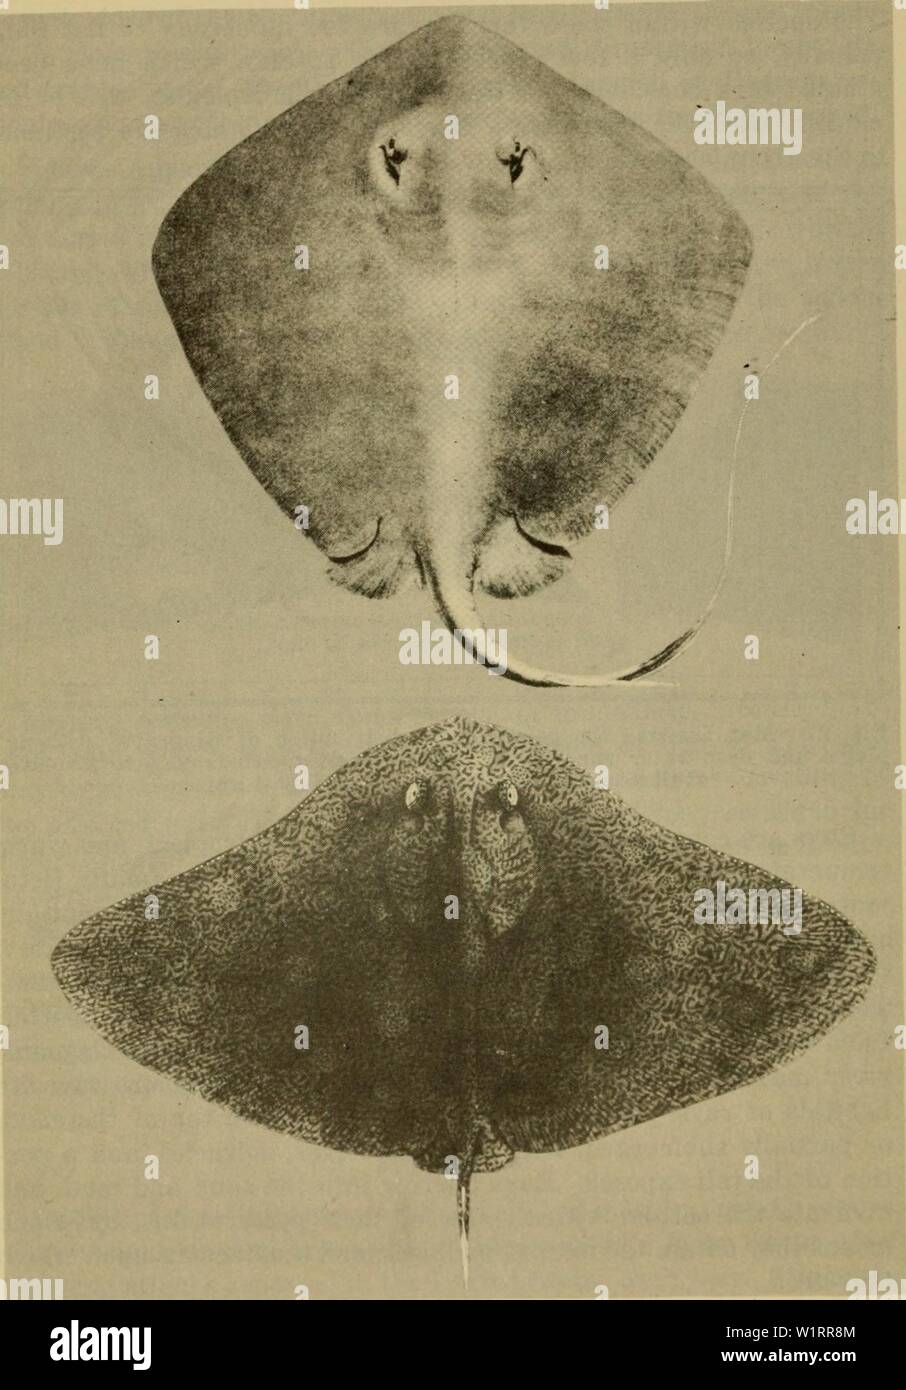 Archive image from page 75 of Dangerous marine animals (1959). Dangerous marine animals  dangerousmarinea00hals Year: 1959 56 DANGEROUS MARINE ANIMALS    Fig. 28. Top: Diamond Stingray, Dasyatis dipterurus (Jordan and Gilbert). (From Walford) Bottom: Butterfly Ray, Gymnura marmorata (Cooper). (From Hiyama) Stock Photo